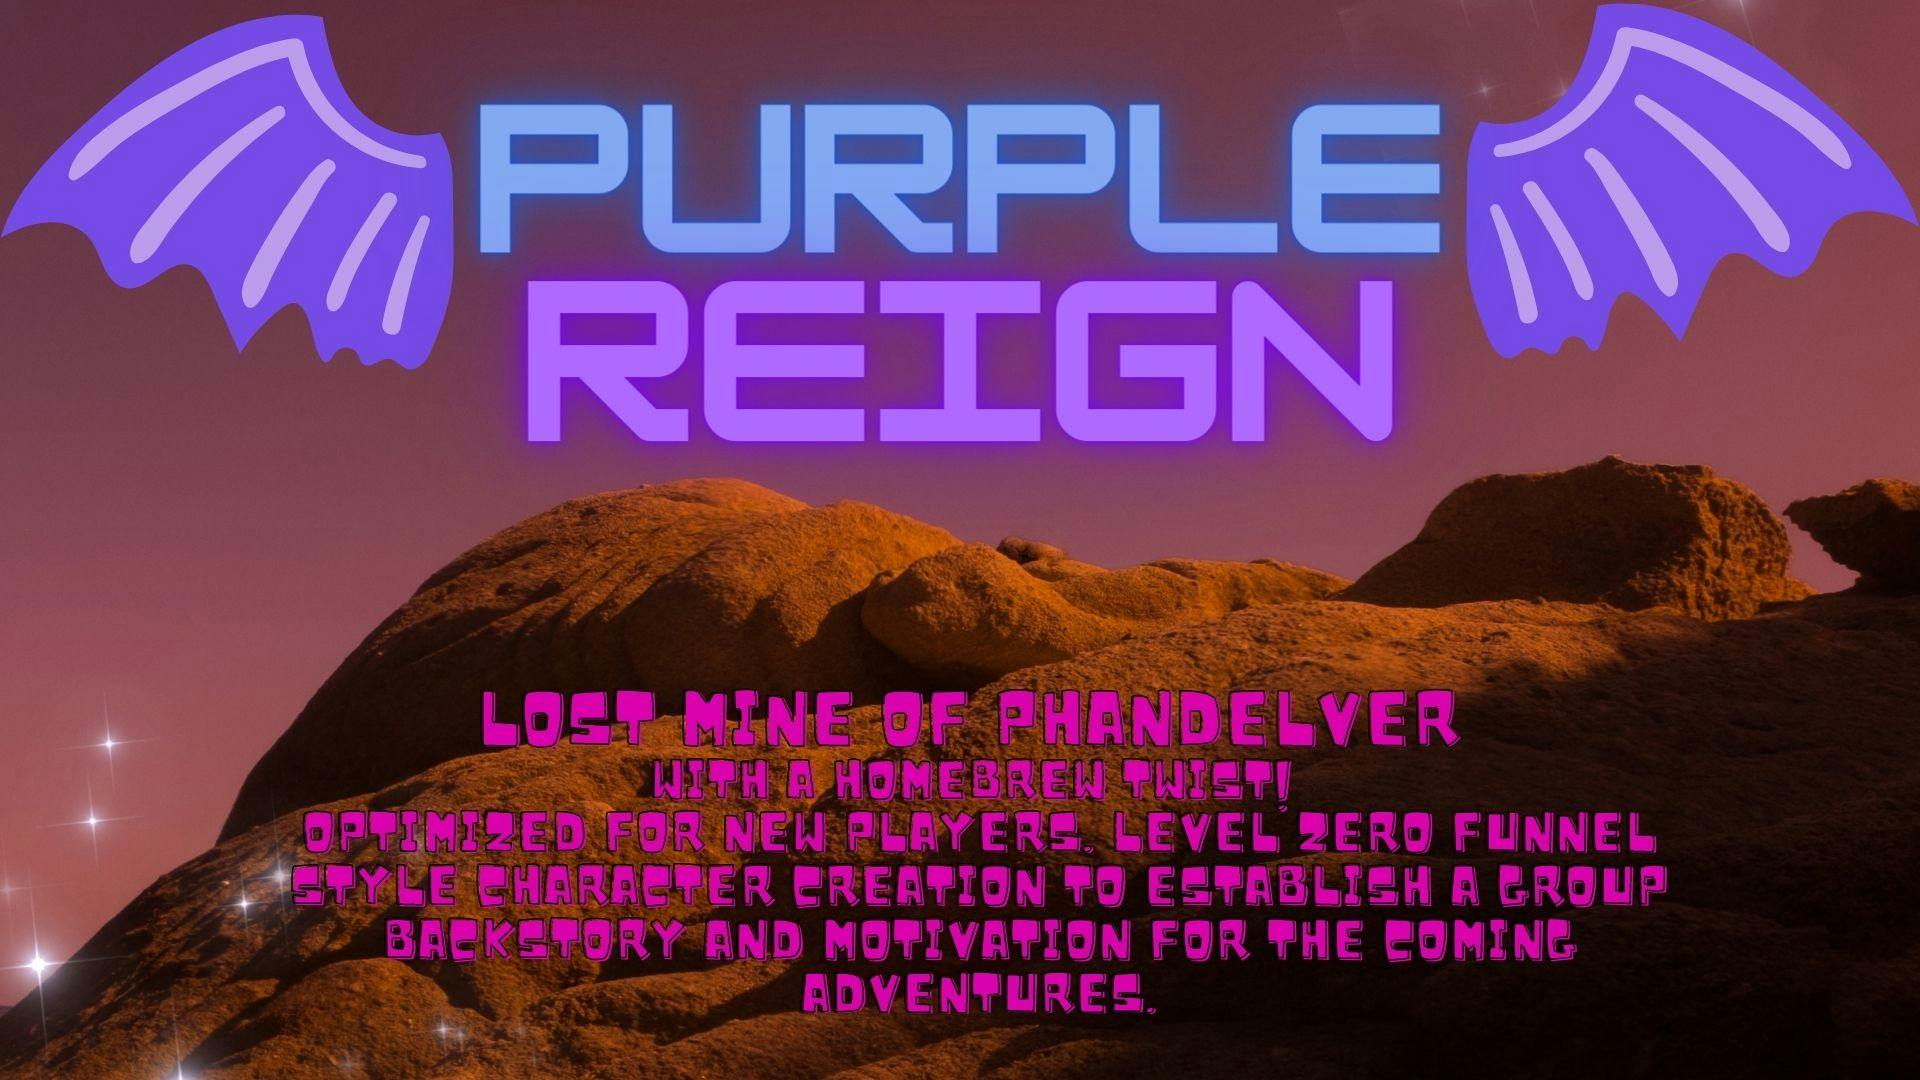 The Lost Mine of Phandelver, Purple Reign Sapphire. [D&D 5e, Level 0-5, fun for all folks]